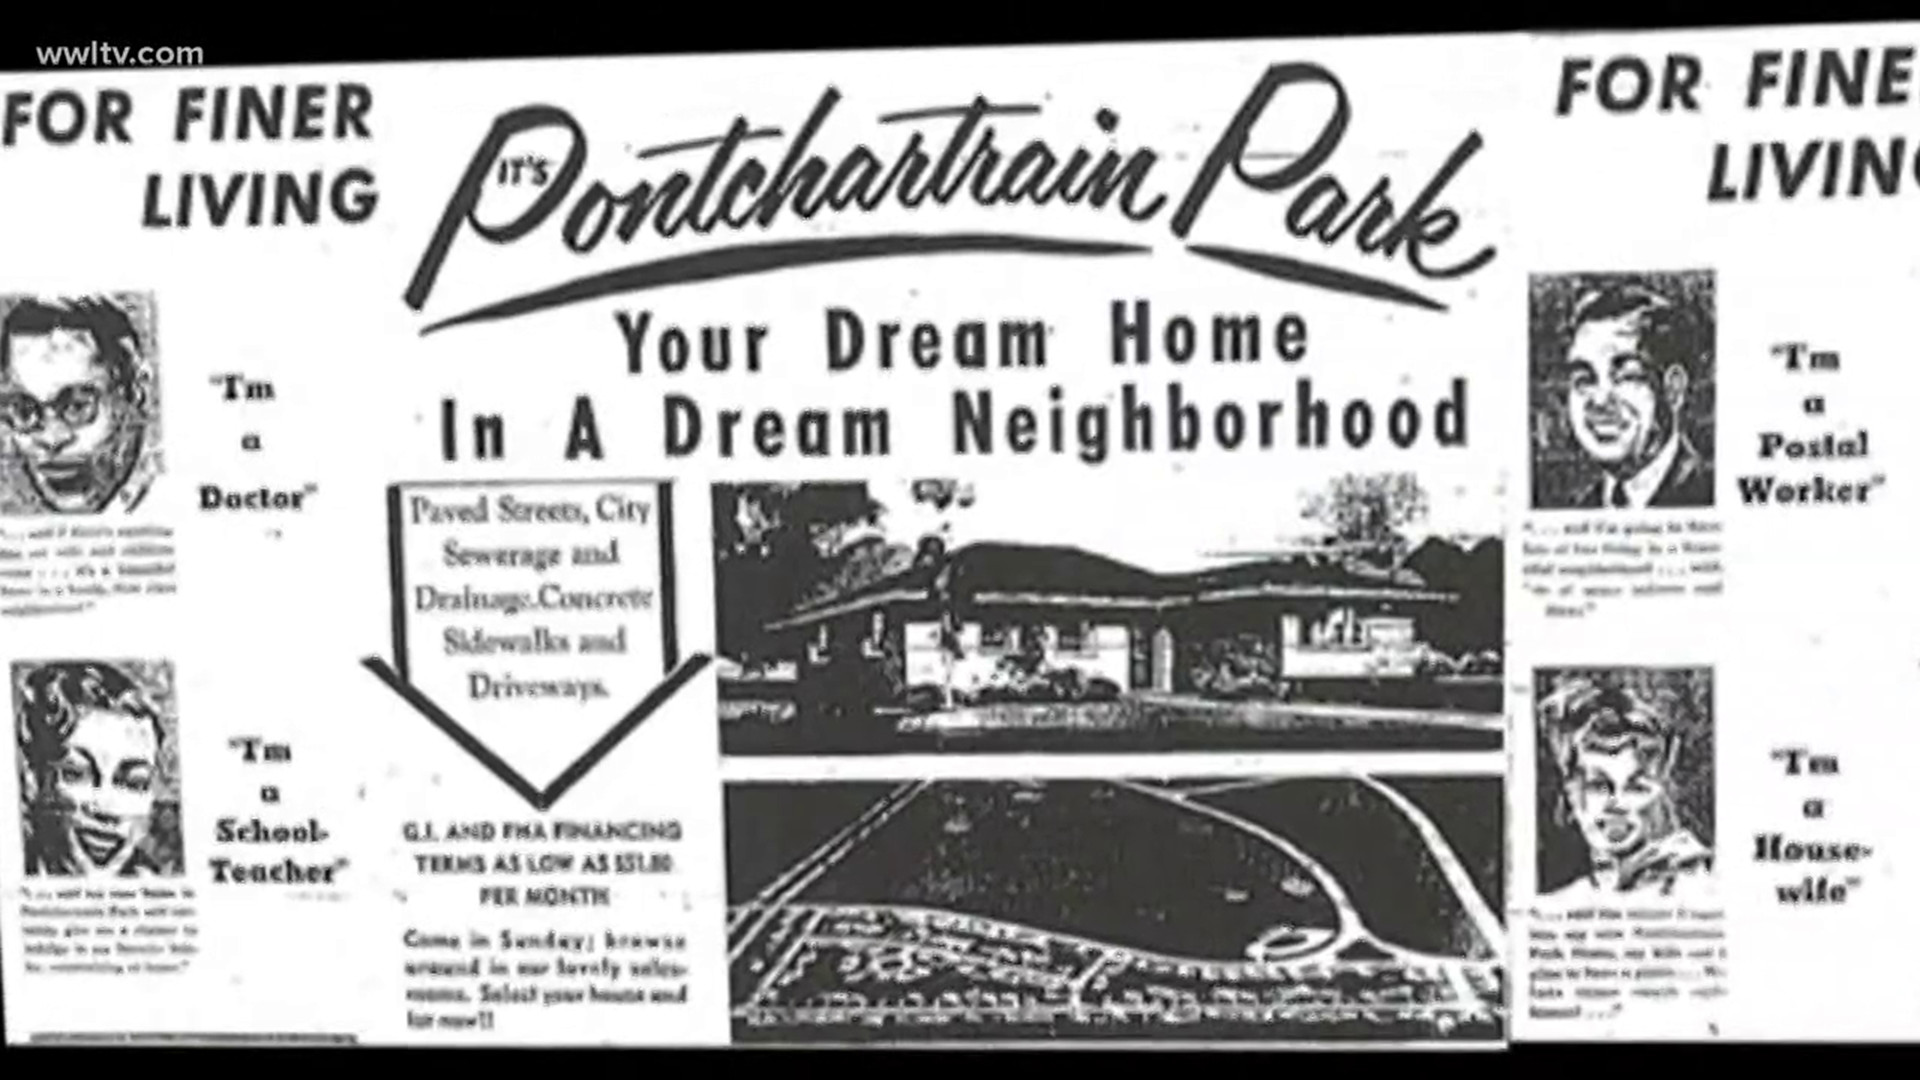 Pontchartrain Park was developed on the lakefront by the Park and Parkways commission. The 200-acre subdivision contained 1,000, two and three-bedroom homes.